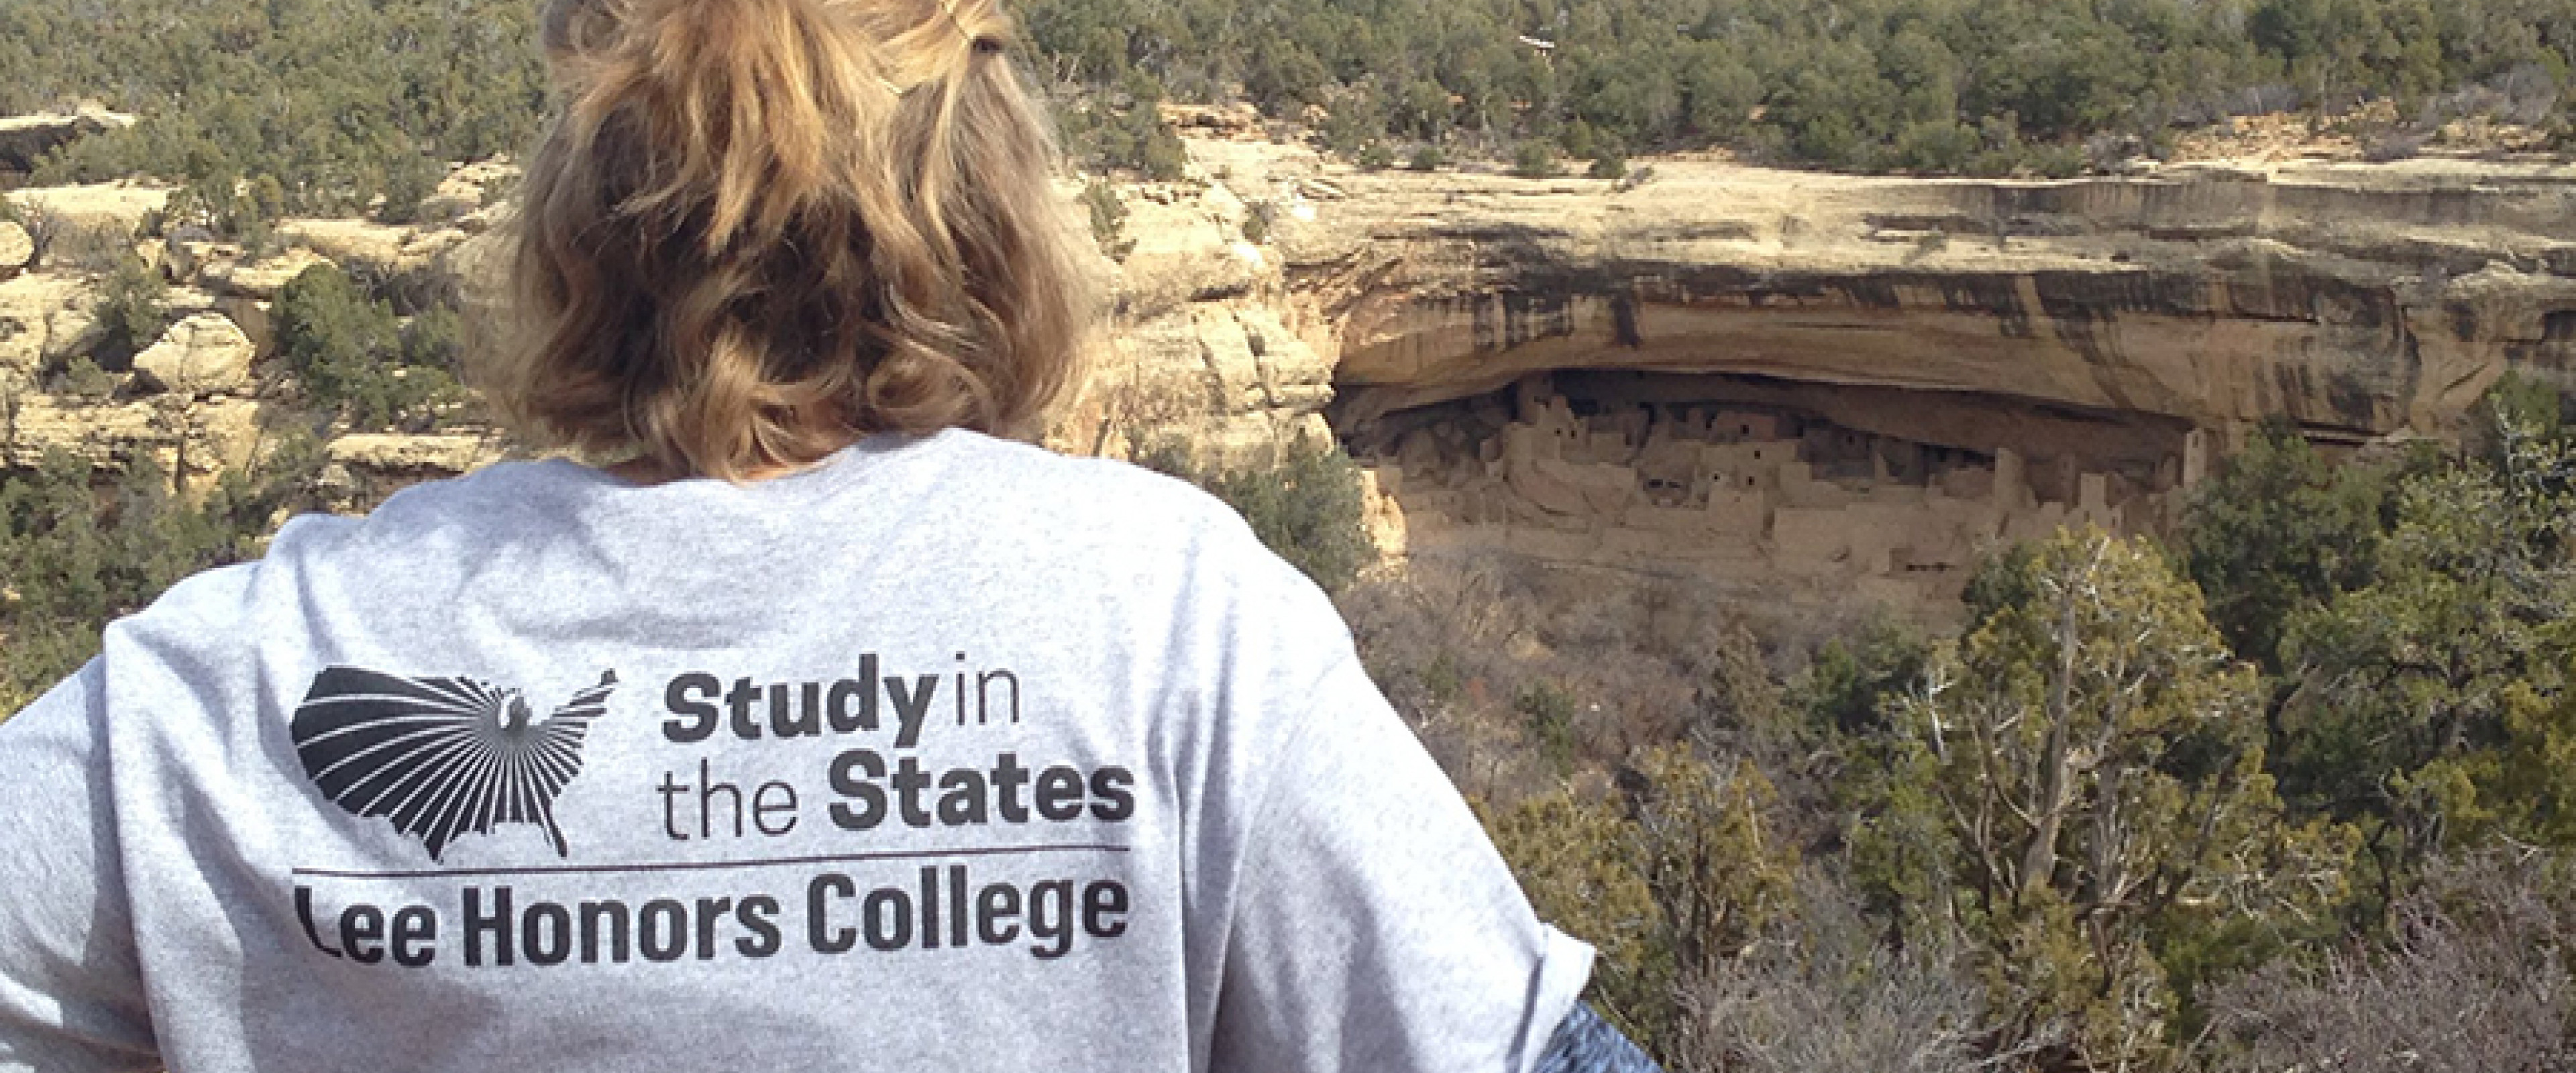 A student in a Study in the States t-shirt looks out over a canyon.